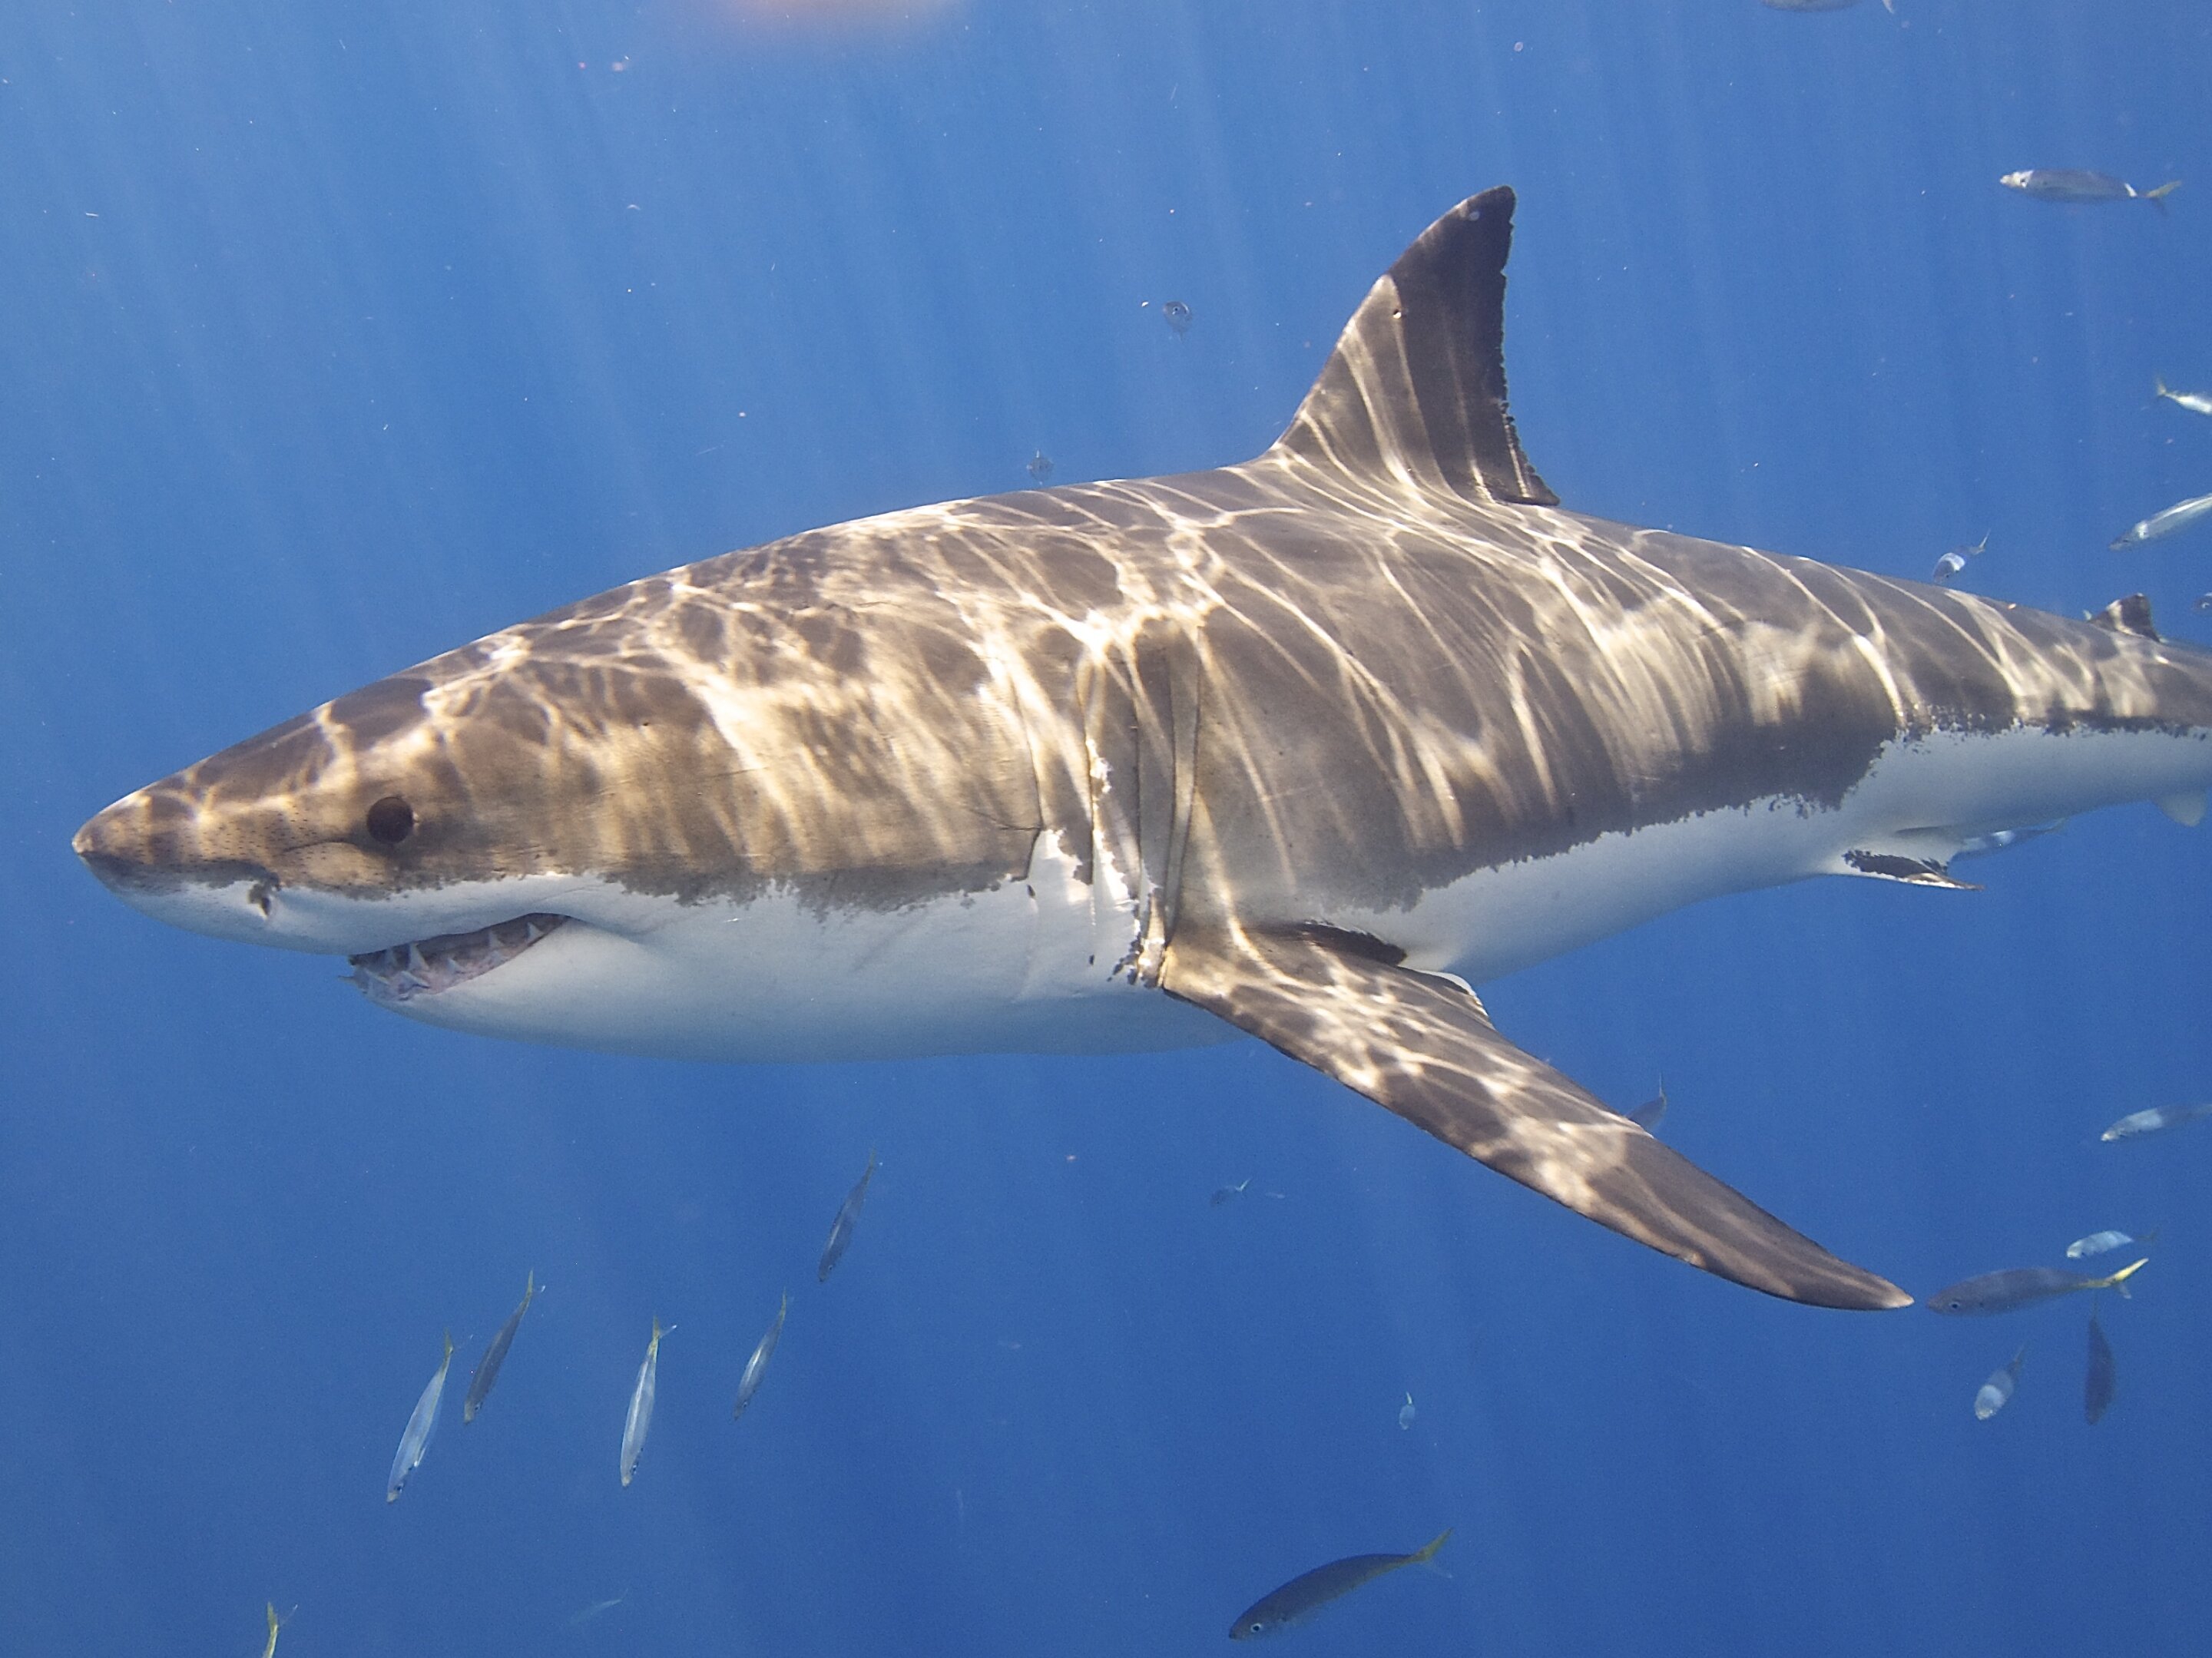 Is fear of sharks being overblown?